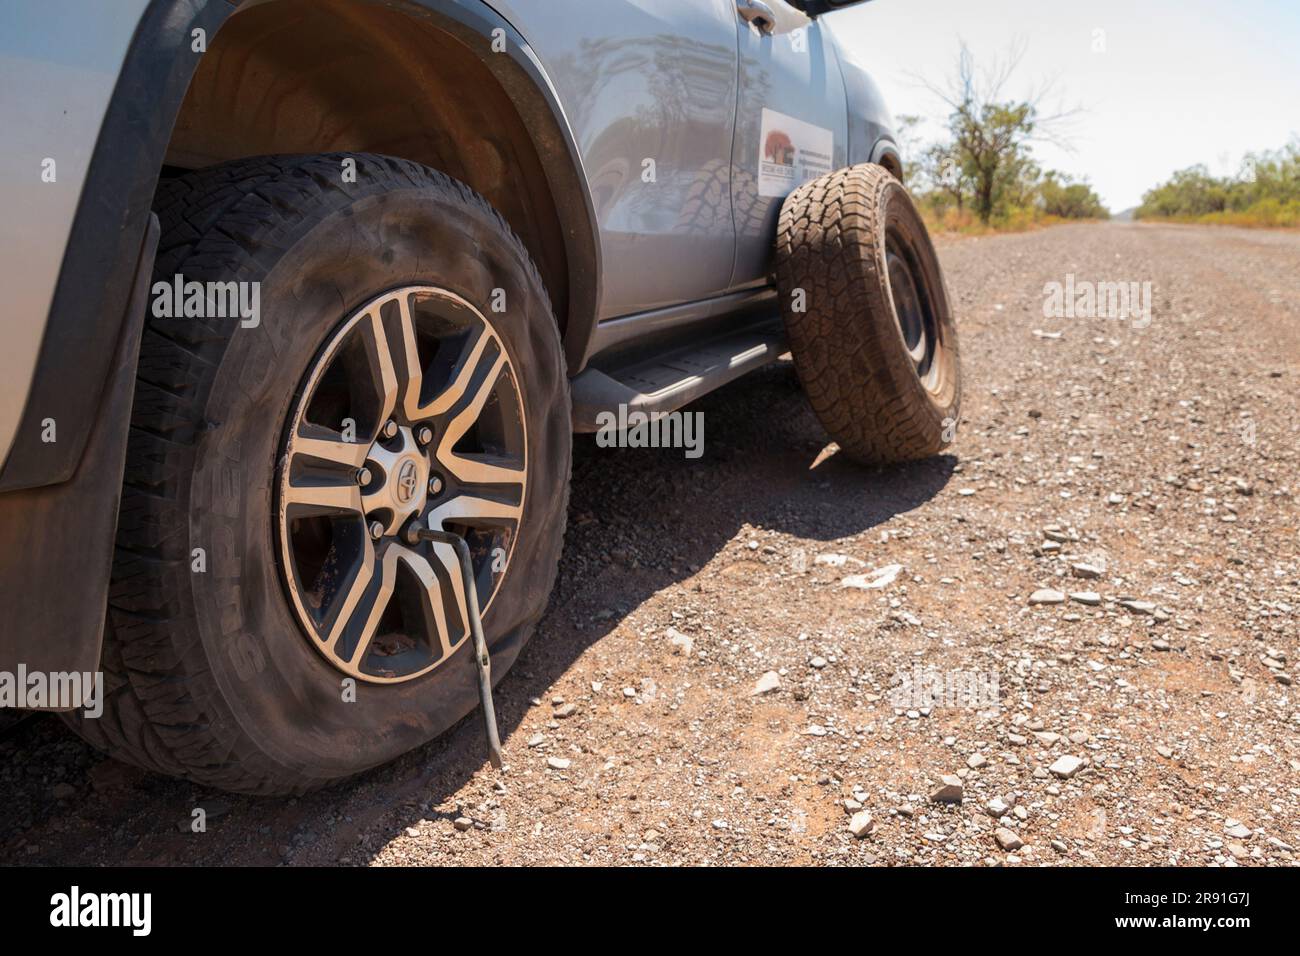 A 4x4 car with a flat tyre has the spare tyre ready to replace it on the Gibb River Road in Western Australia Stock Photo